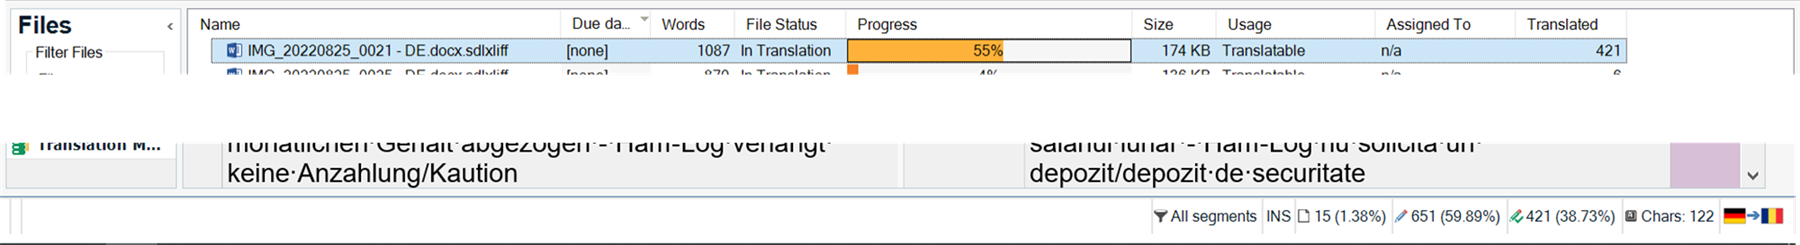 Screenshot of Trados Studio interface showing two files in translation with progress percentages of 55% and 40% respectively, and a detailed view of segment progress with percentages for segments, words, and characters.